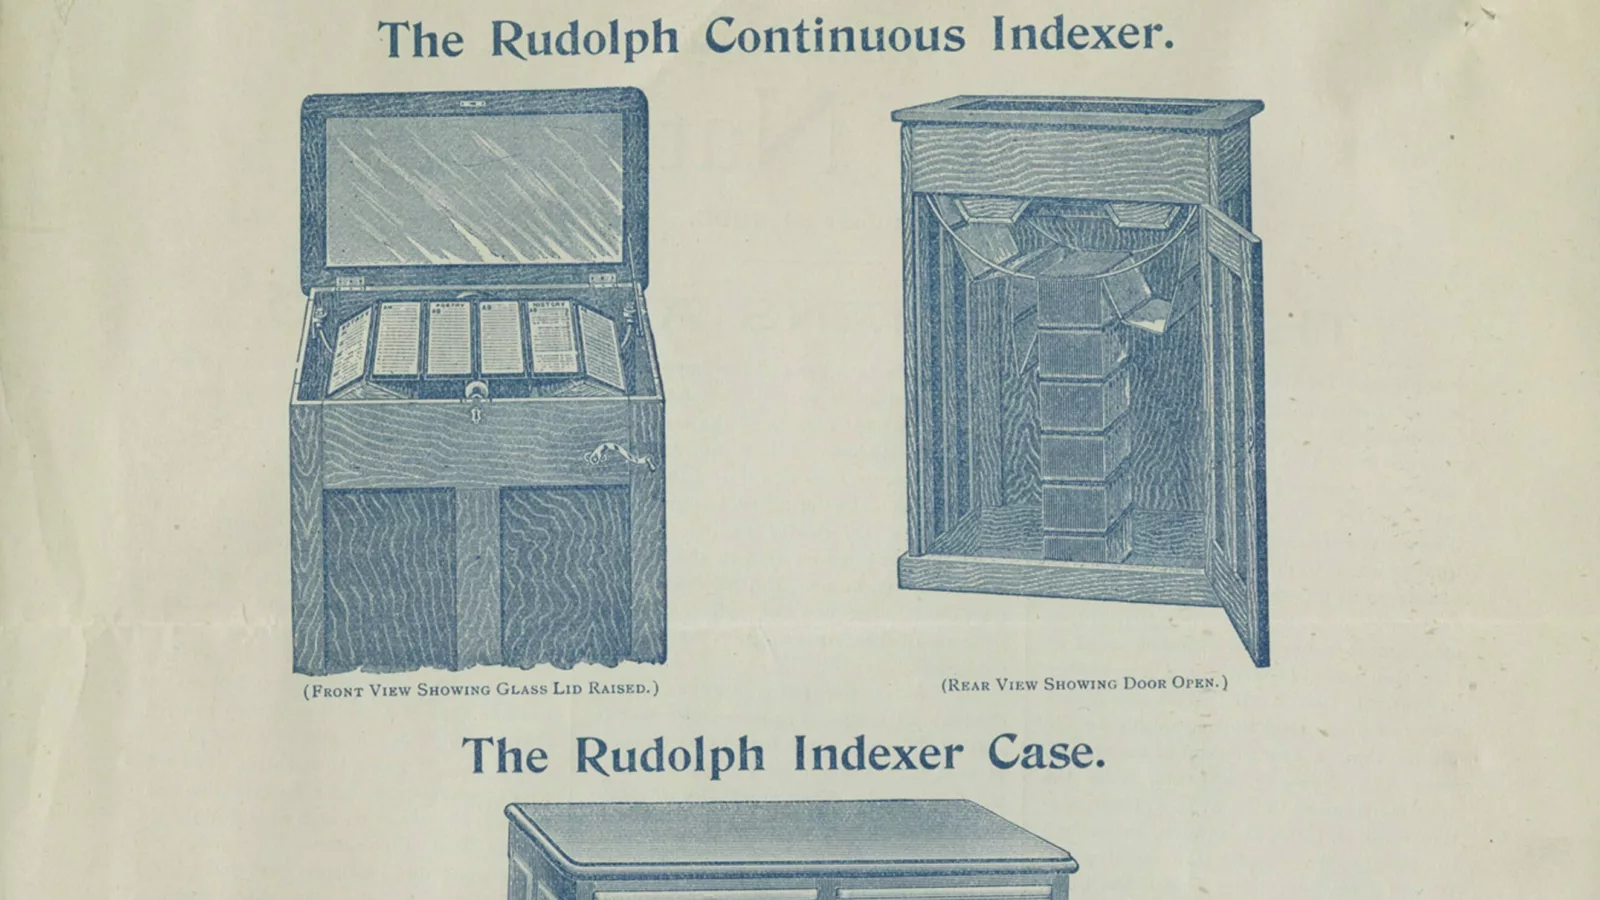 NL Archives 02 15 01 01 Bx 2 Fl 136 Rudolph Indexer pg 6 o21